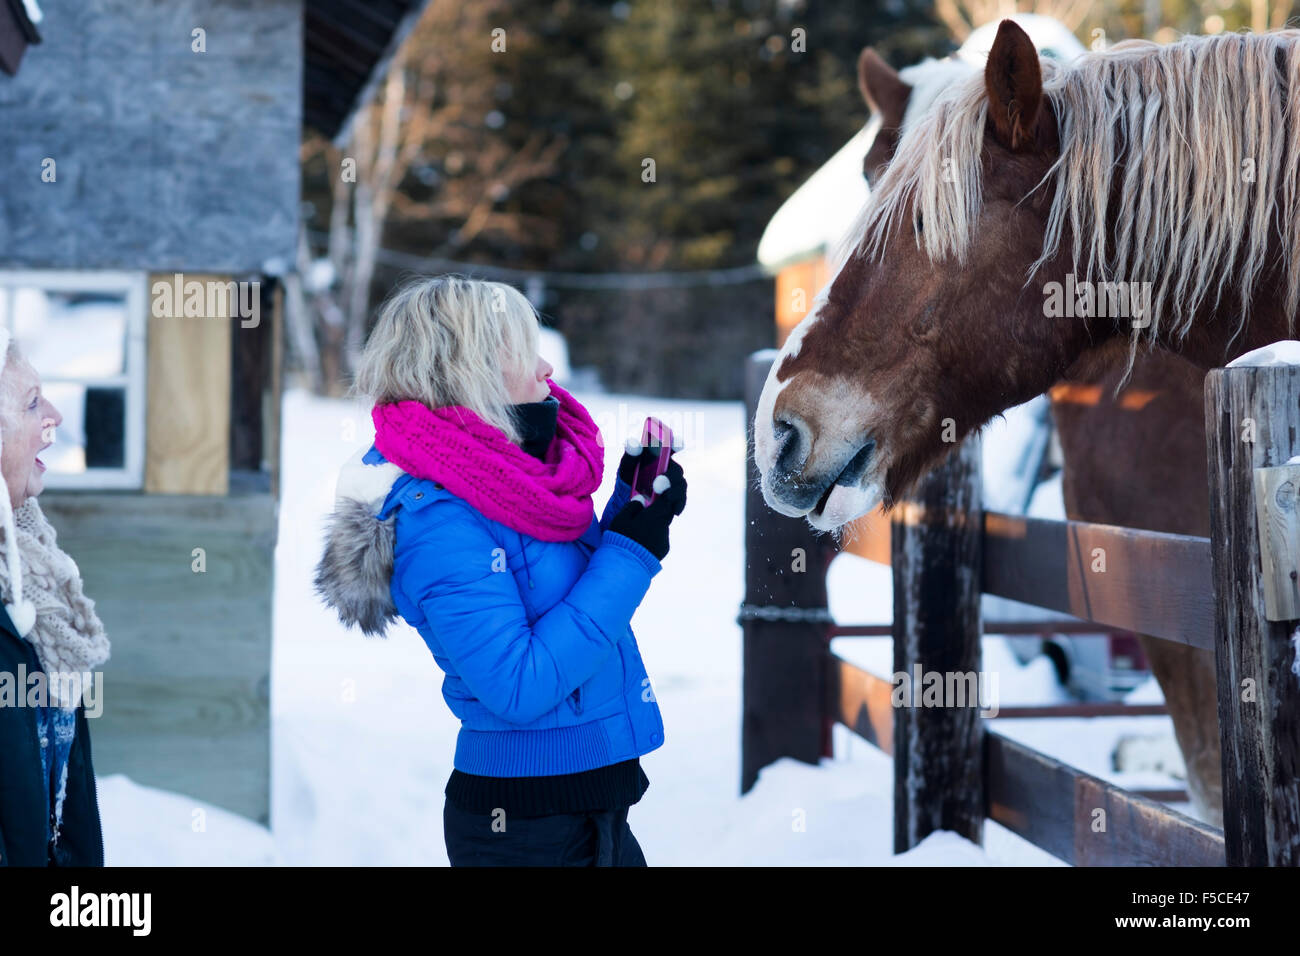 Caucasian woman is surprised by a Belgian draft horse that grabbed her scarf on a winter day, Gunflint Trail, Grand Marais, MN Stock Photo